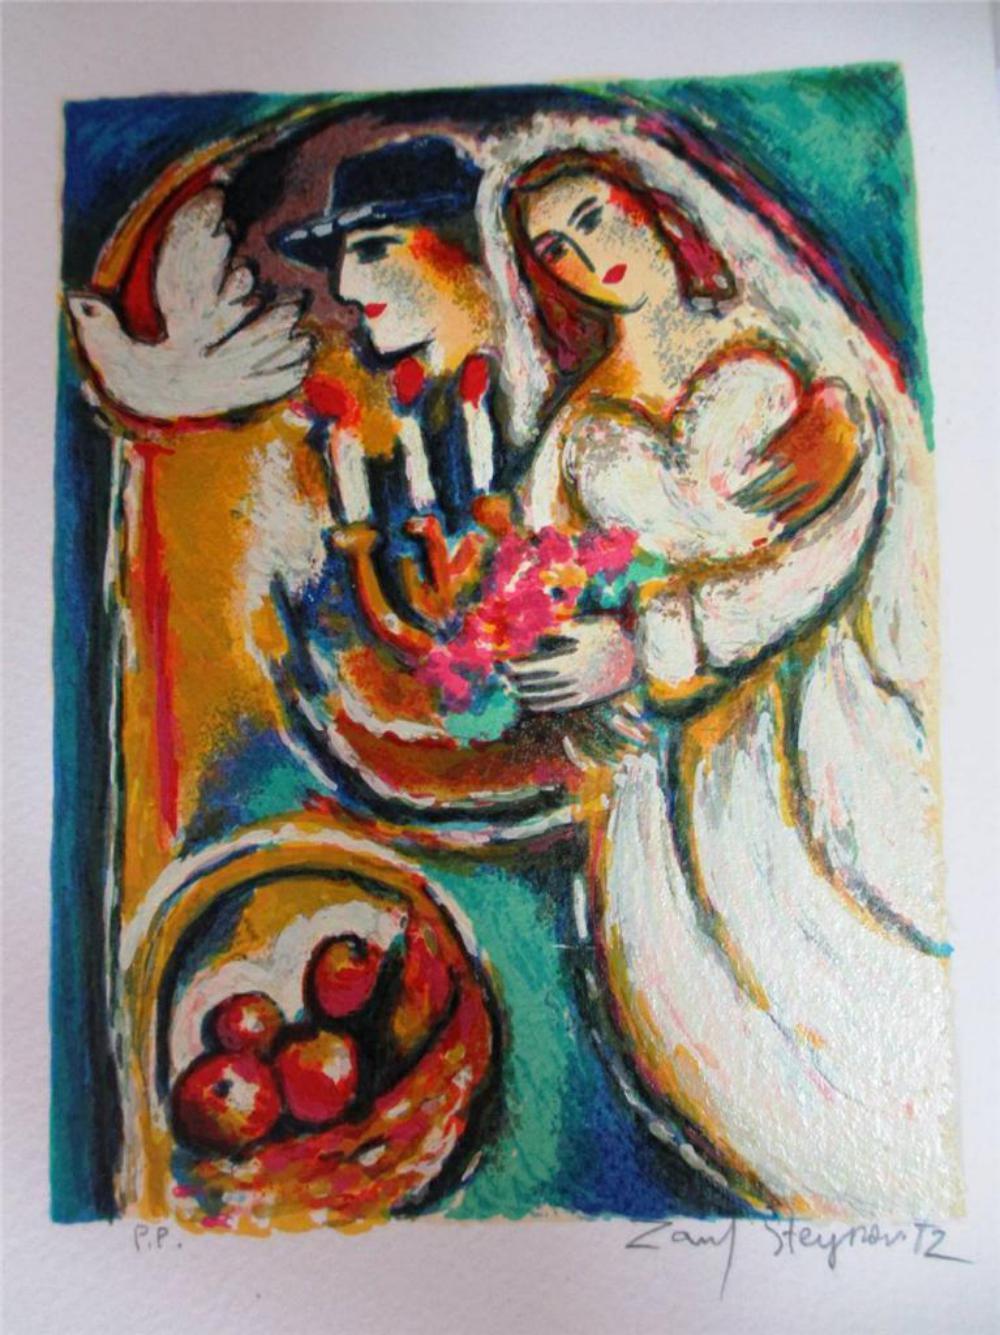 Zamy Steynovitz "Love and Peace" Signed and numbered